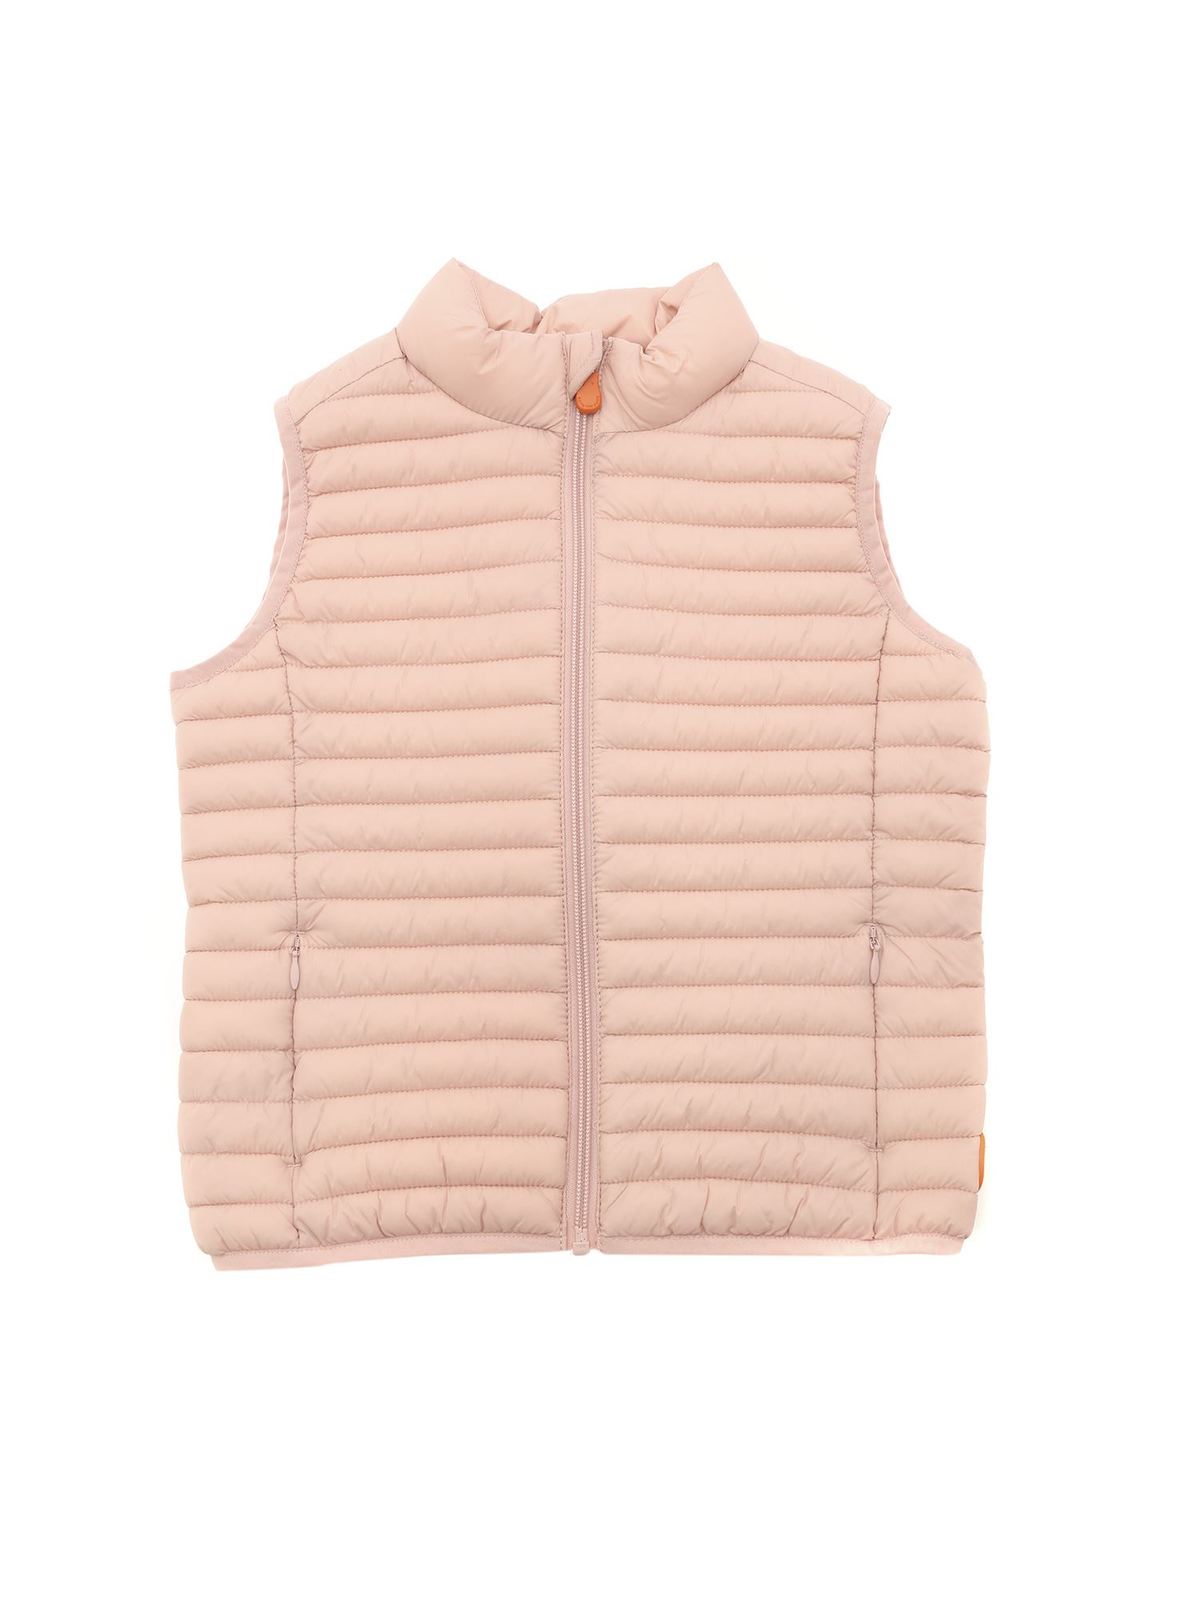 SAVE THE DUCK GIGAX WAISTCOAT IN PINK